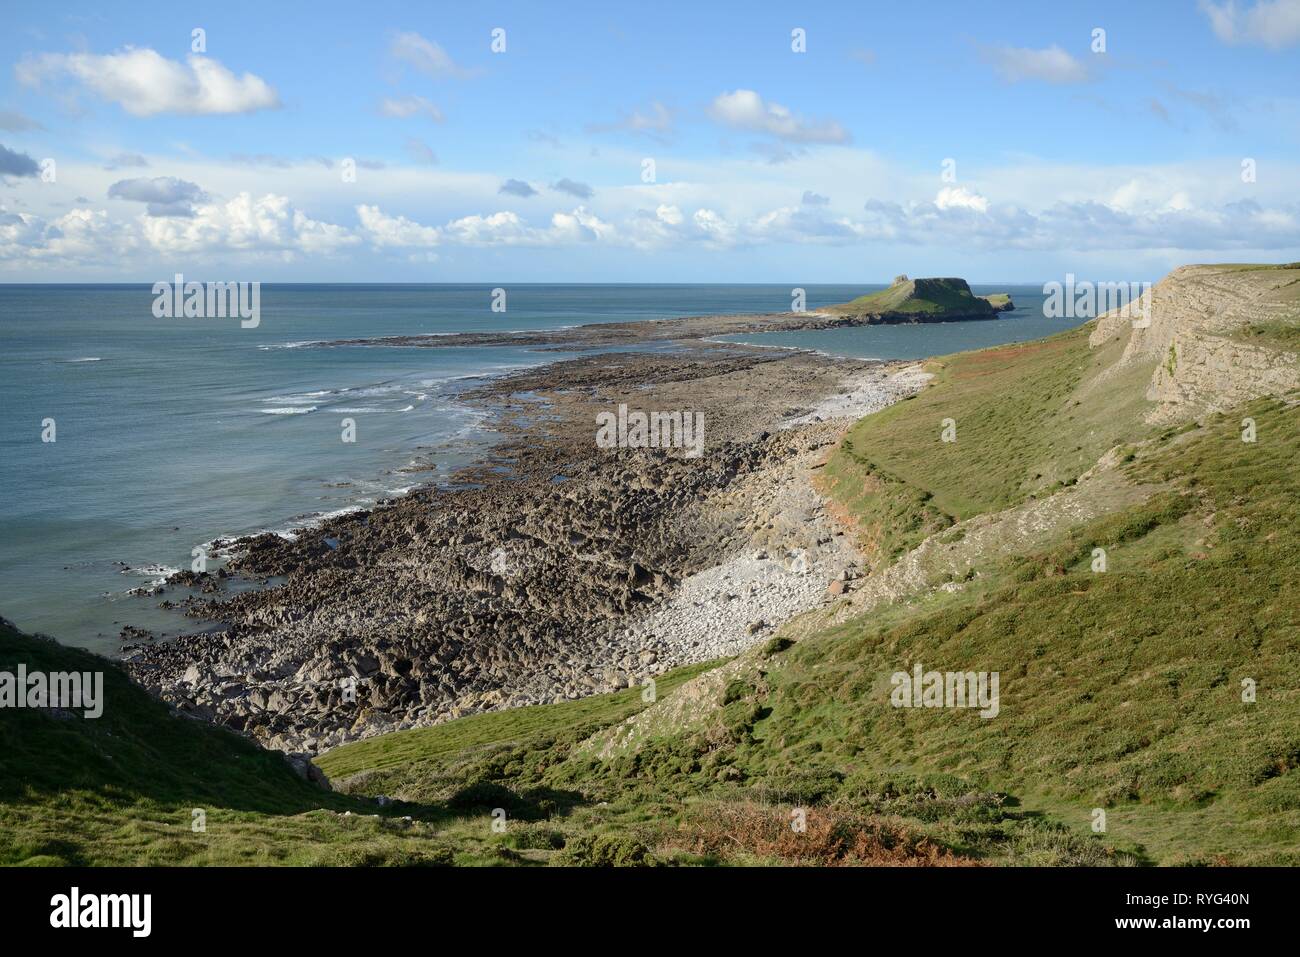 Overview of the Worm's head with the causeway that connects it to the mainland exposed at low tide, Rhossili, The Gower peninsula, Wales, UK, October  Stock Photo